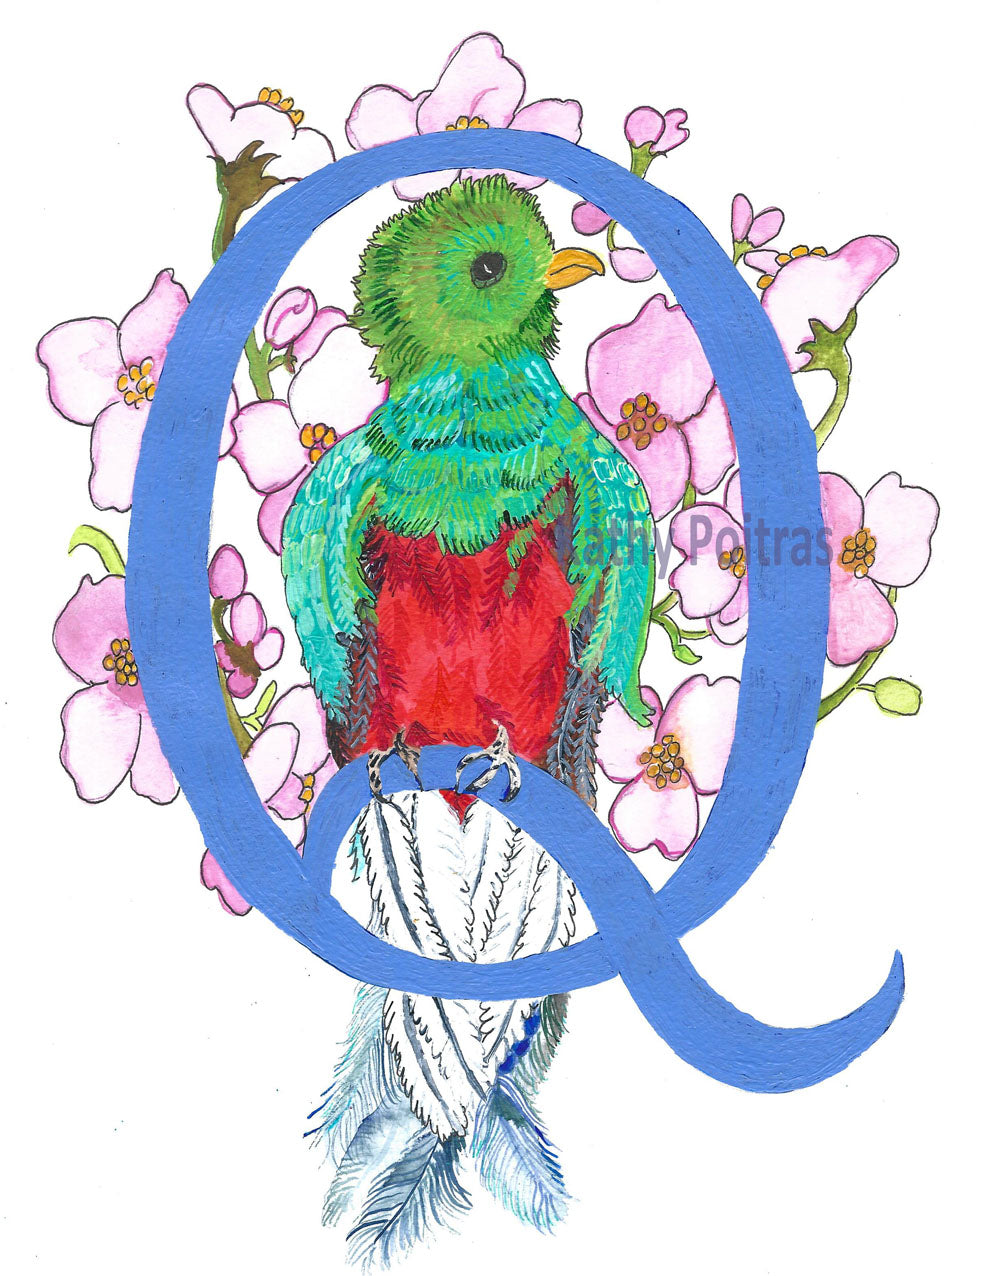  Letter Q for Quetzal and Quince